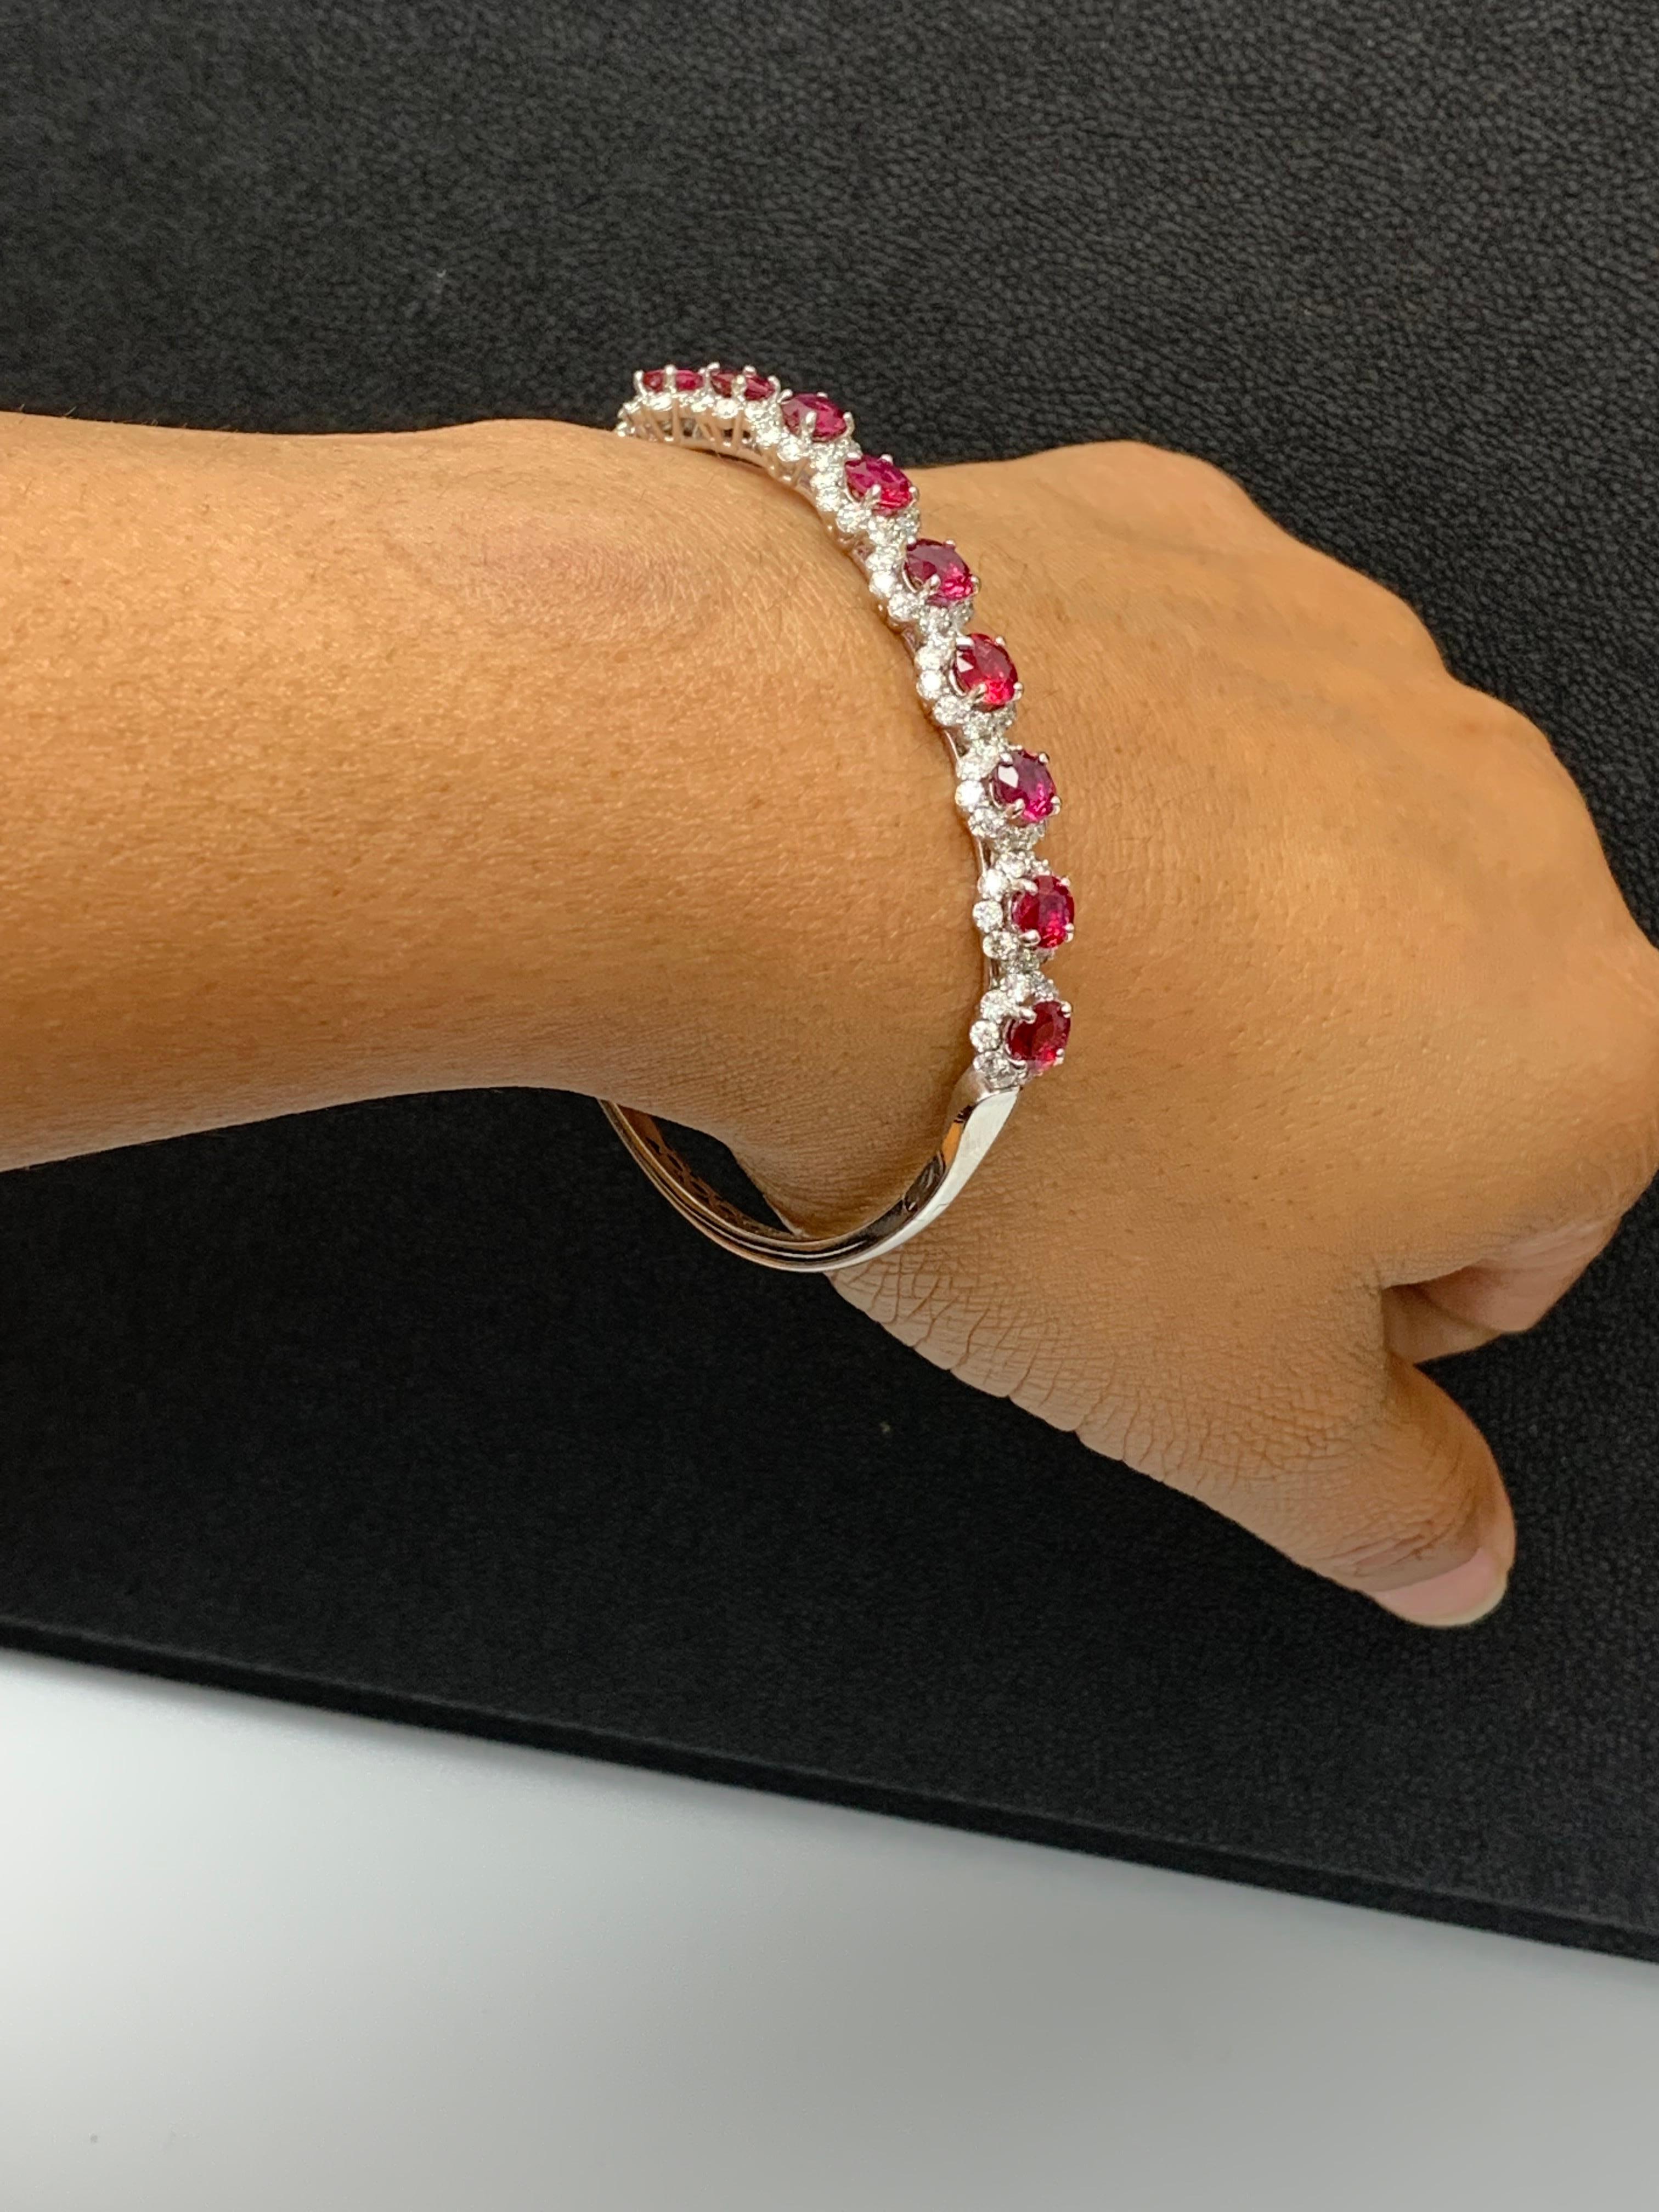 4.76 Carat Brilliant Cut Ruby and Diamond Bangle Bracelet in 18k White Gold For Sale 4